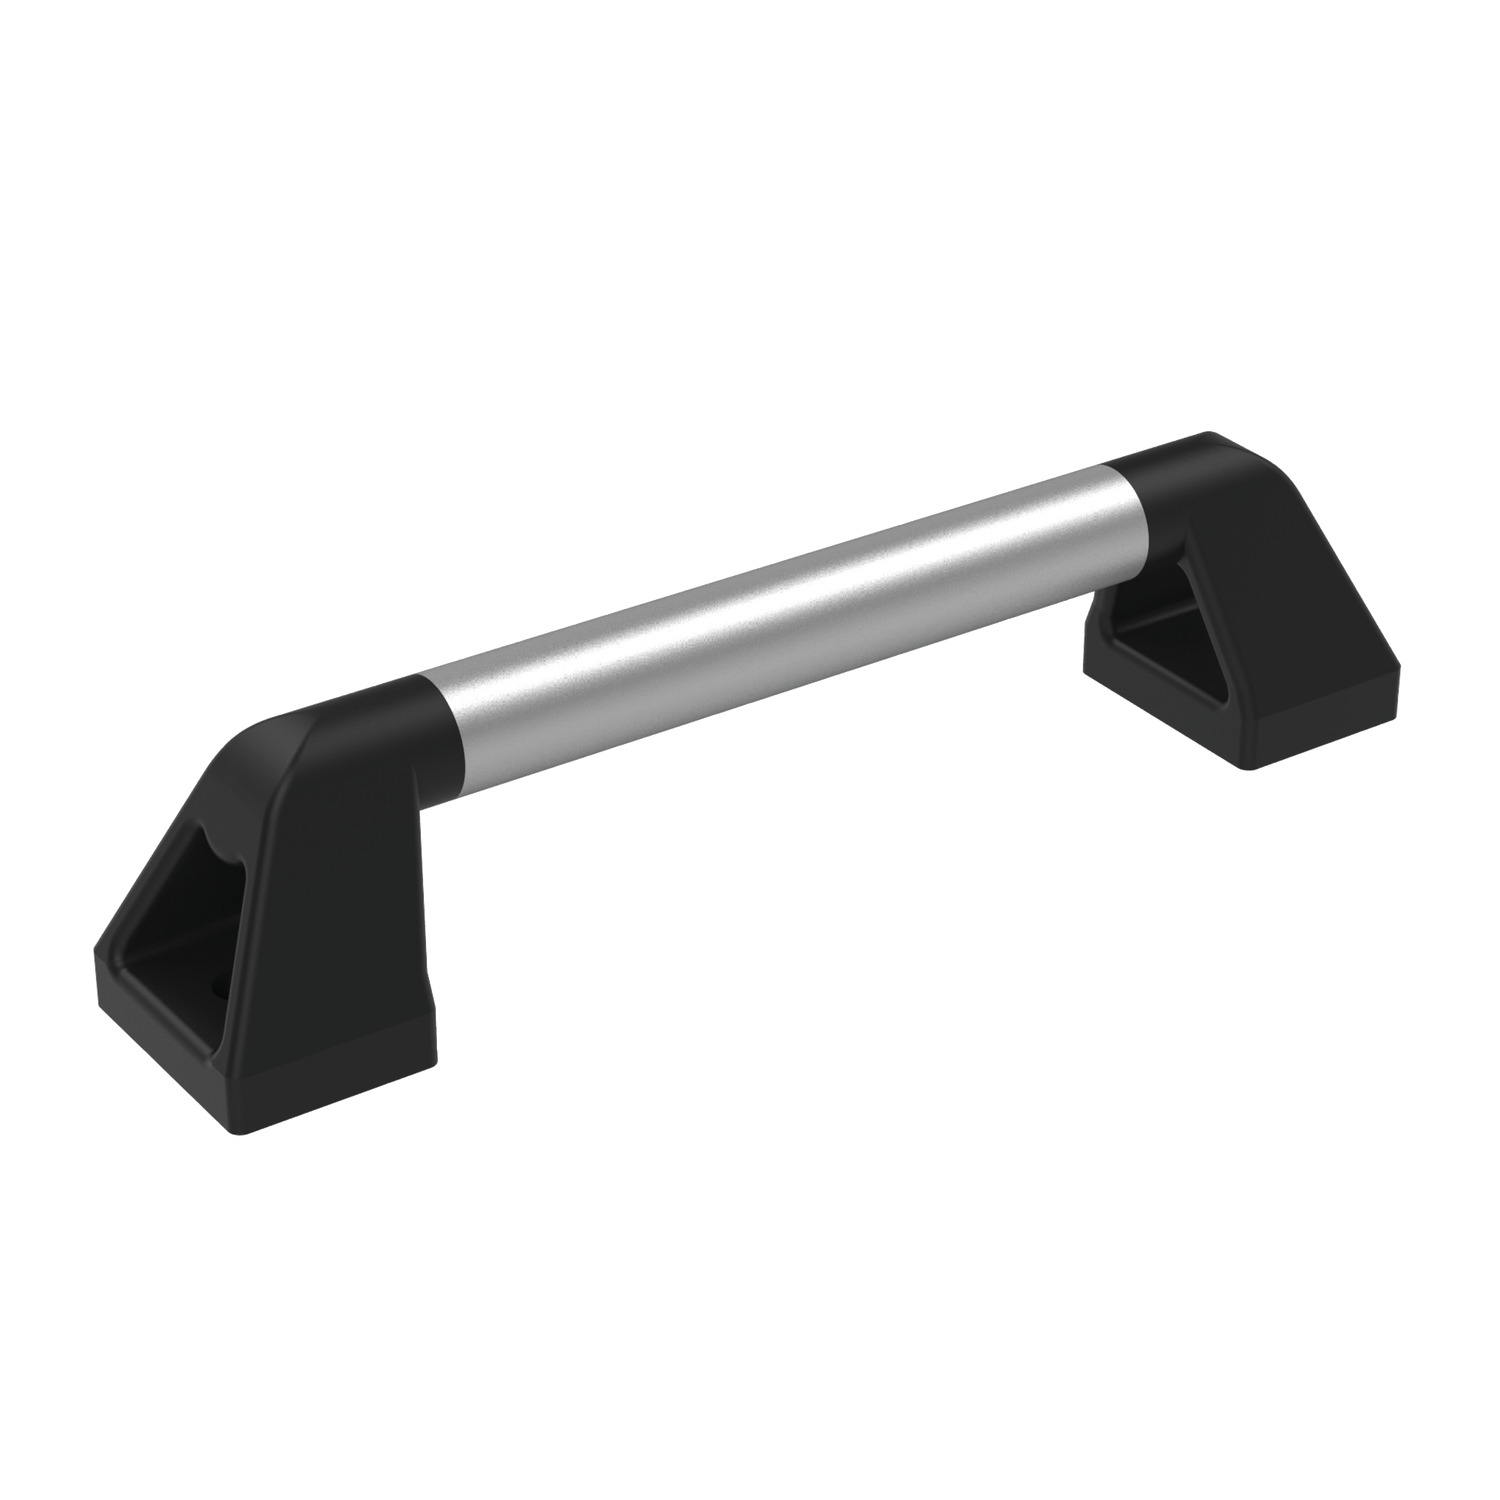 79420.W0701 Pull Handle - Heavy Duty - Thermoplastic Rear Mounting - 700 - 750